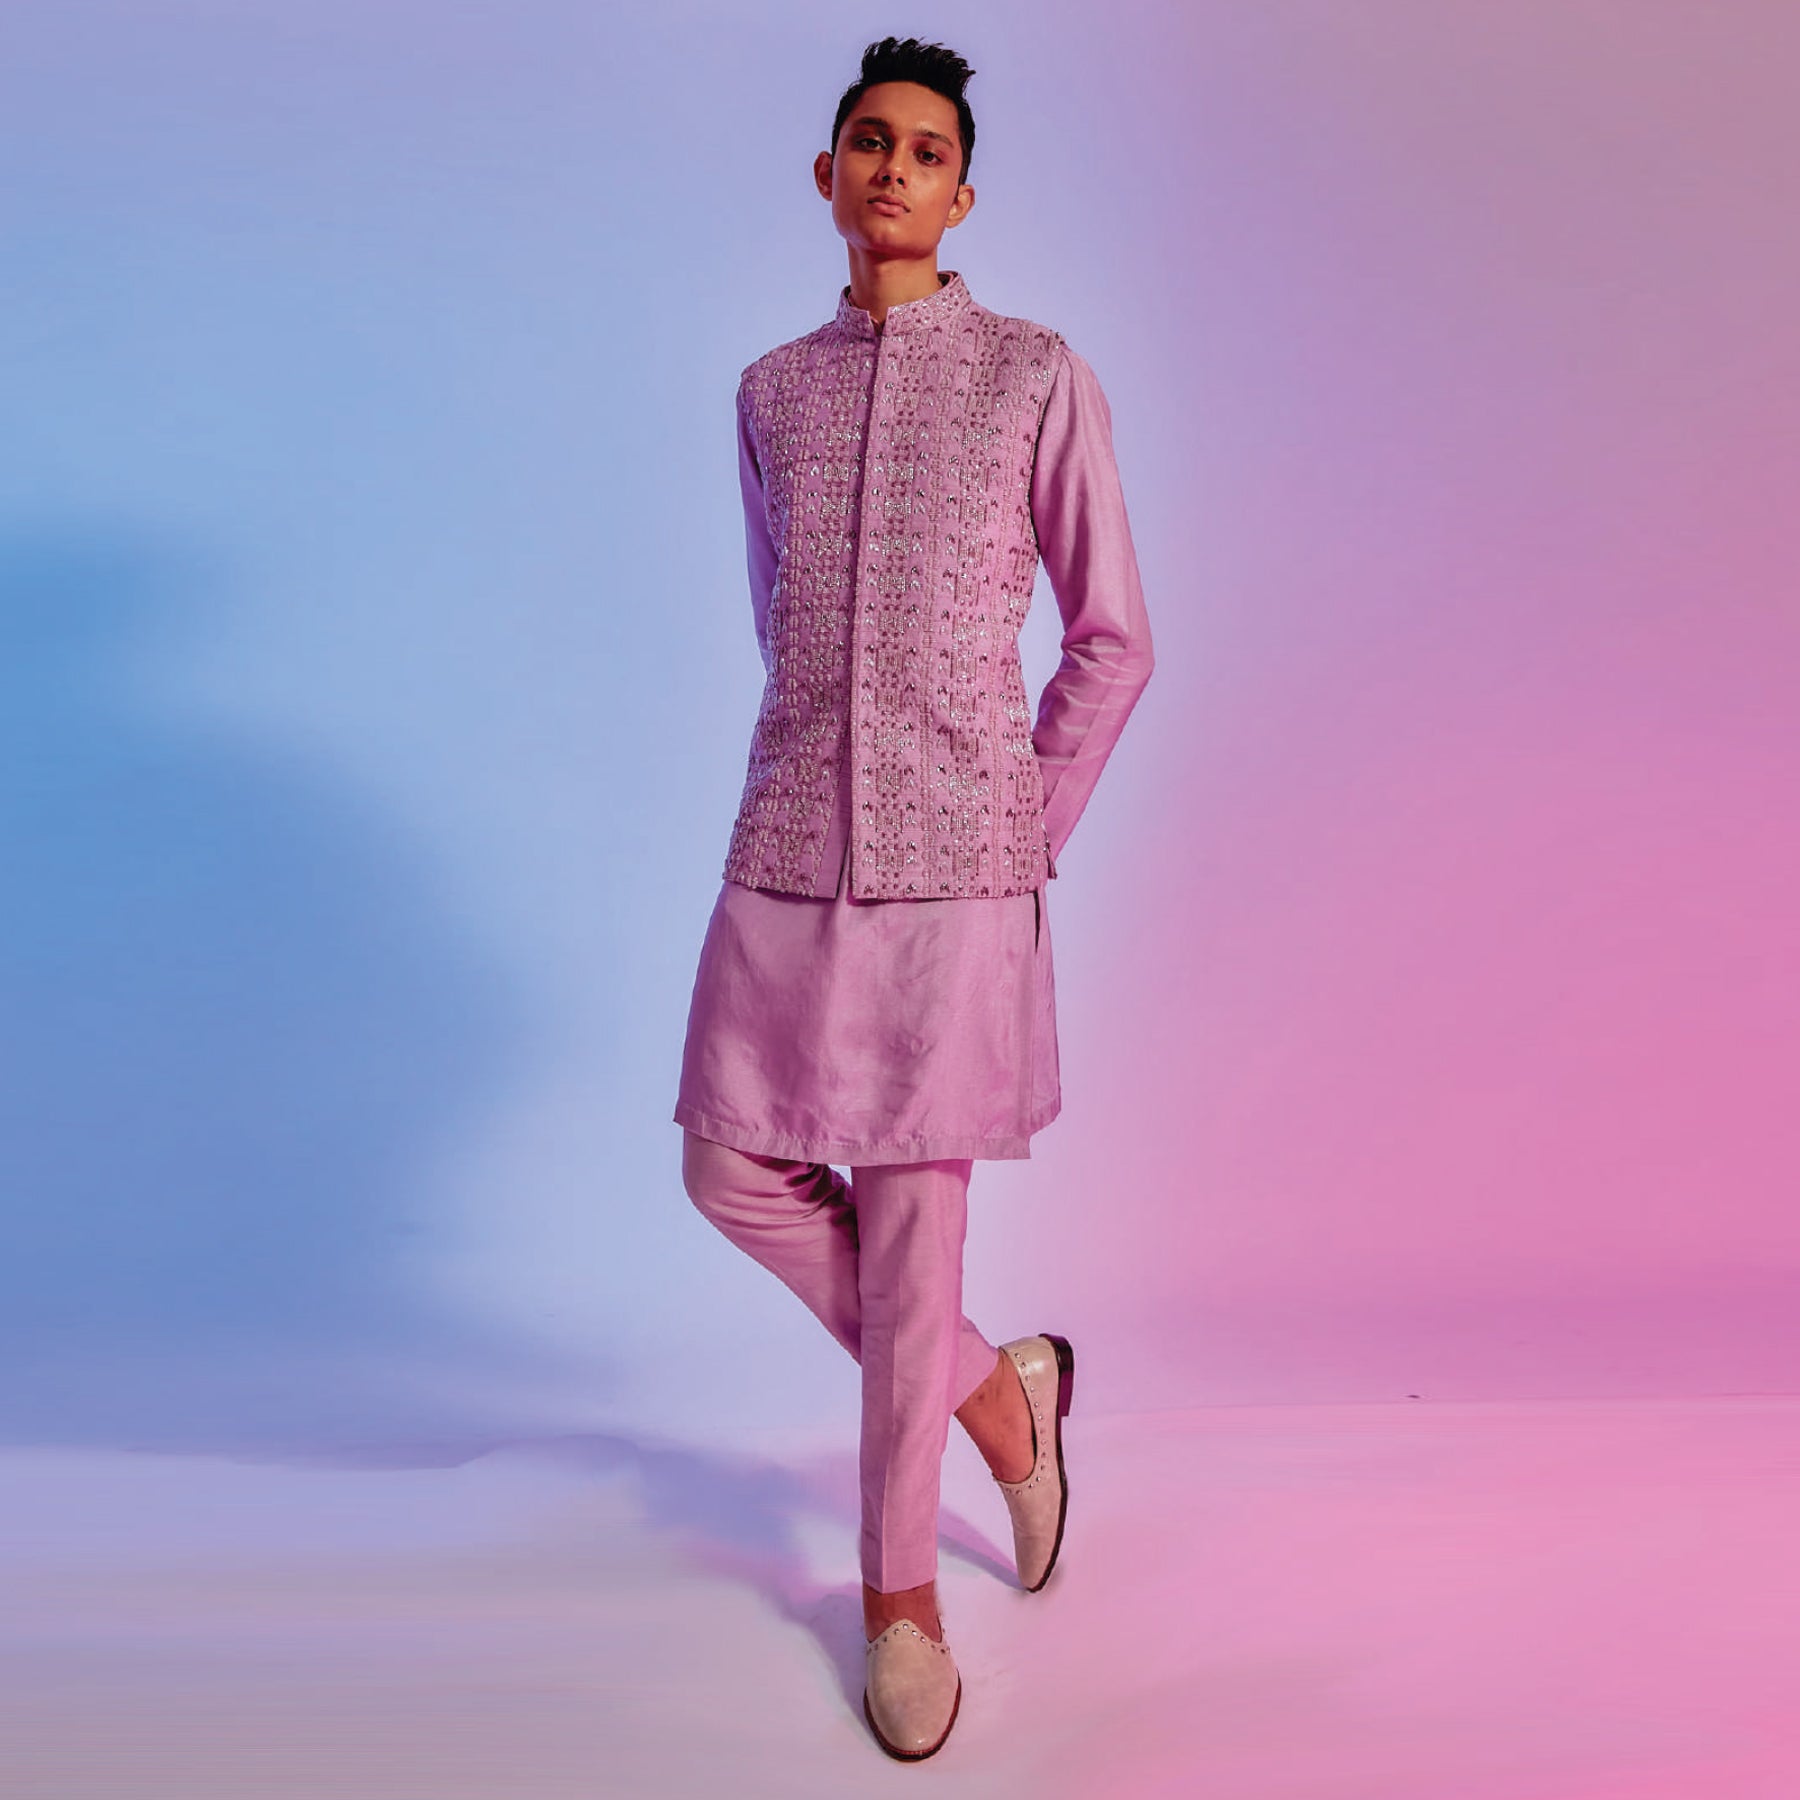 LILAC KURTA WITH EMBELLISHED COLLAR KURTA PATTI AND PANTS PAIRED WITH LILAC INTRICATE EMBELLISHED BUN